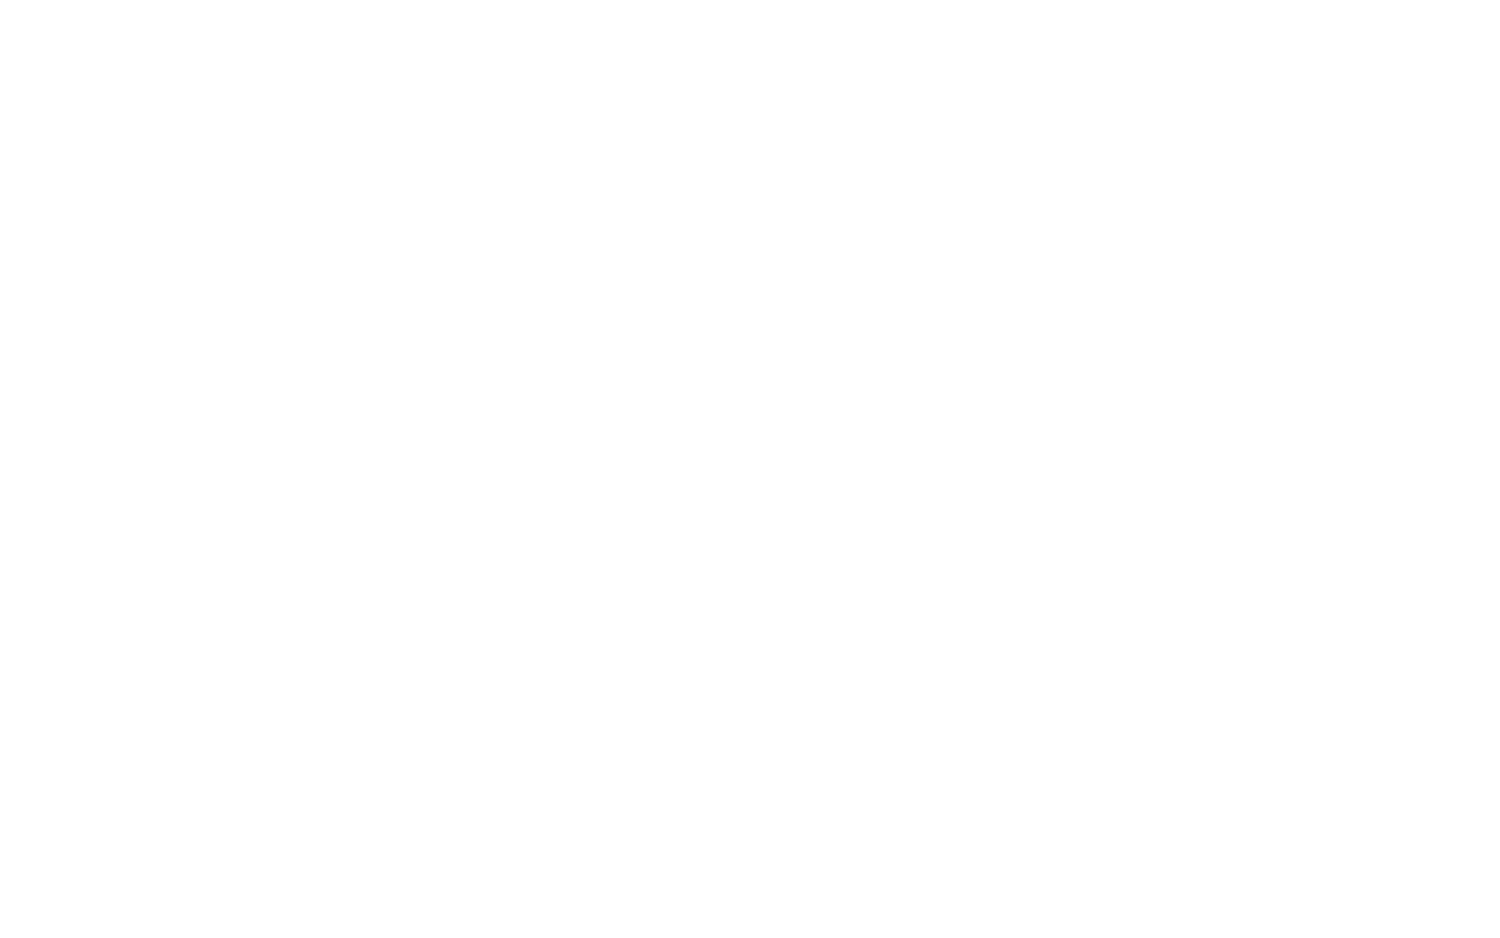 New South Counseling Group